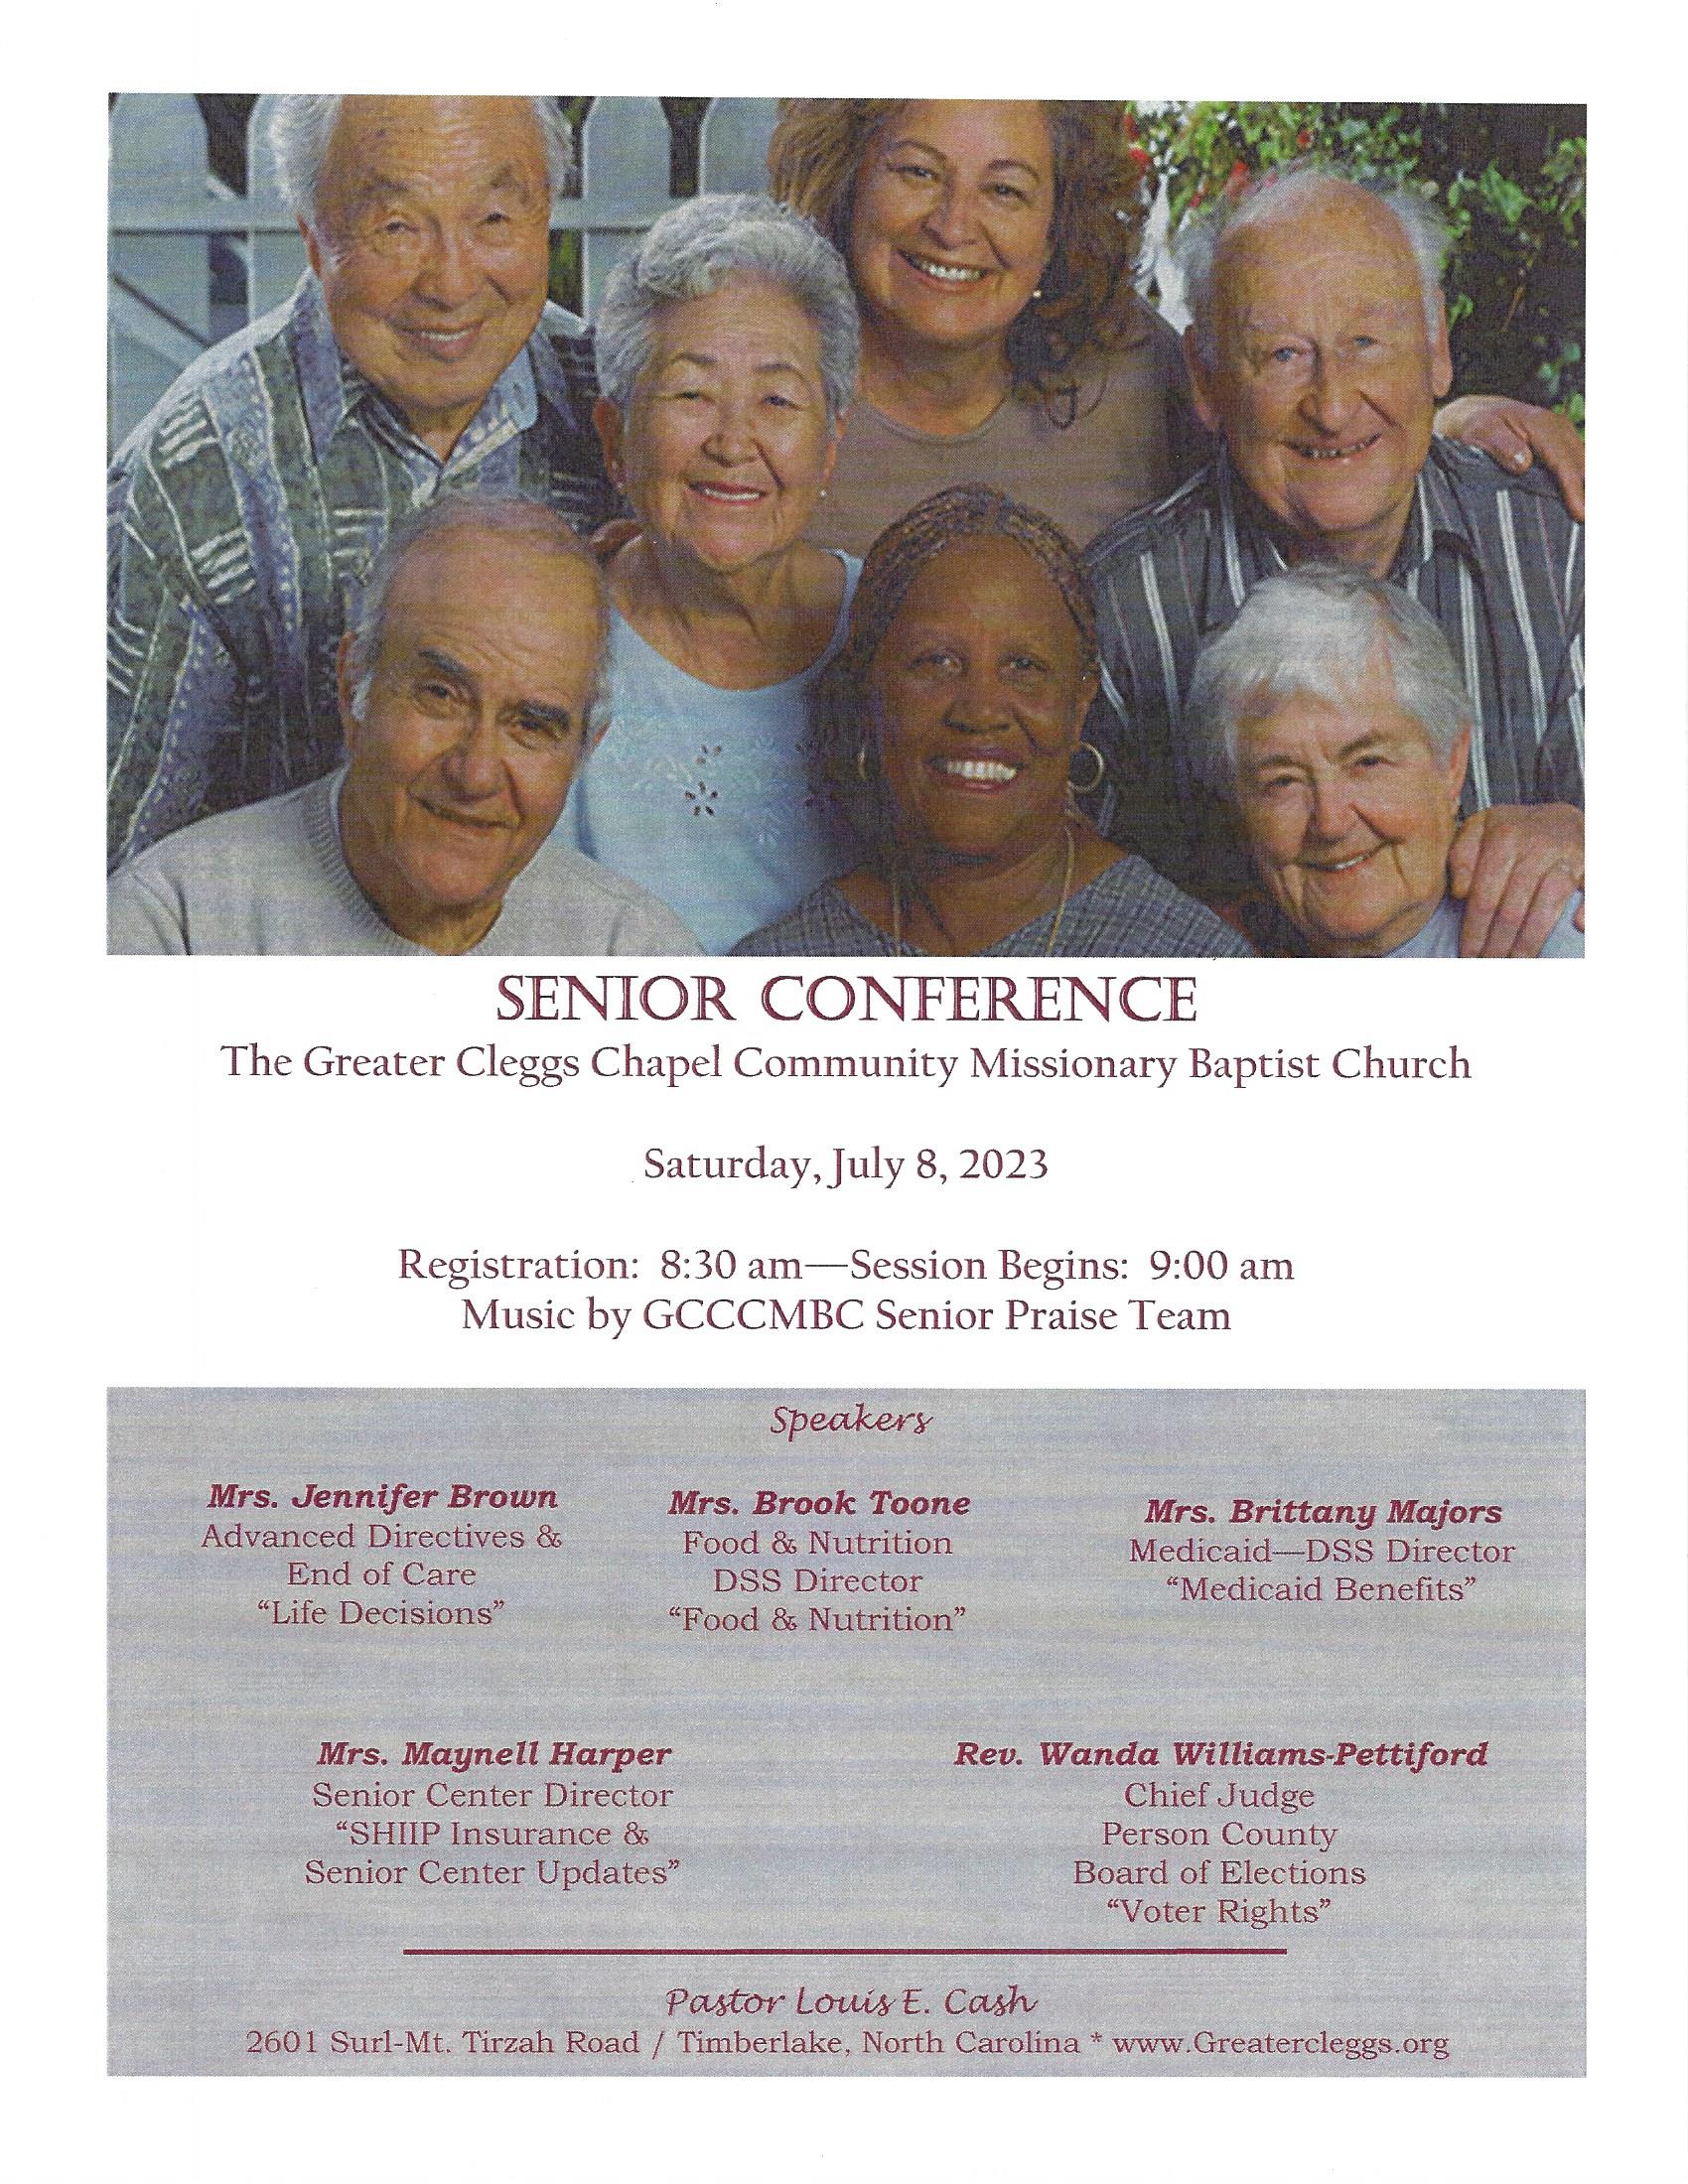 Senior Conference, at the Greater Cleggs Chapel Community Missionary Baptist Church